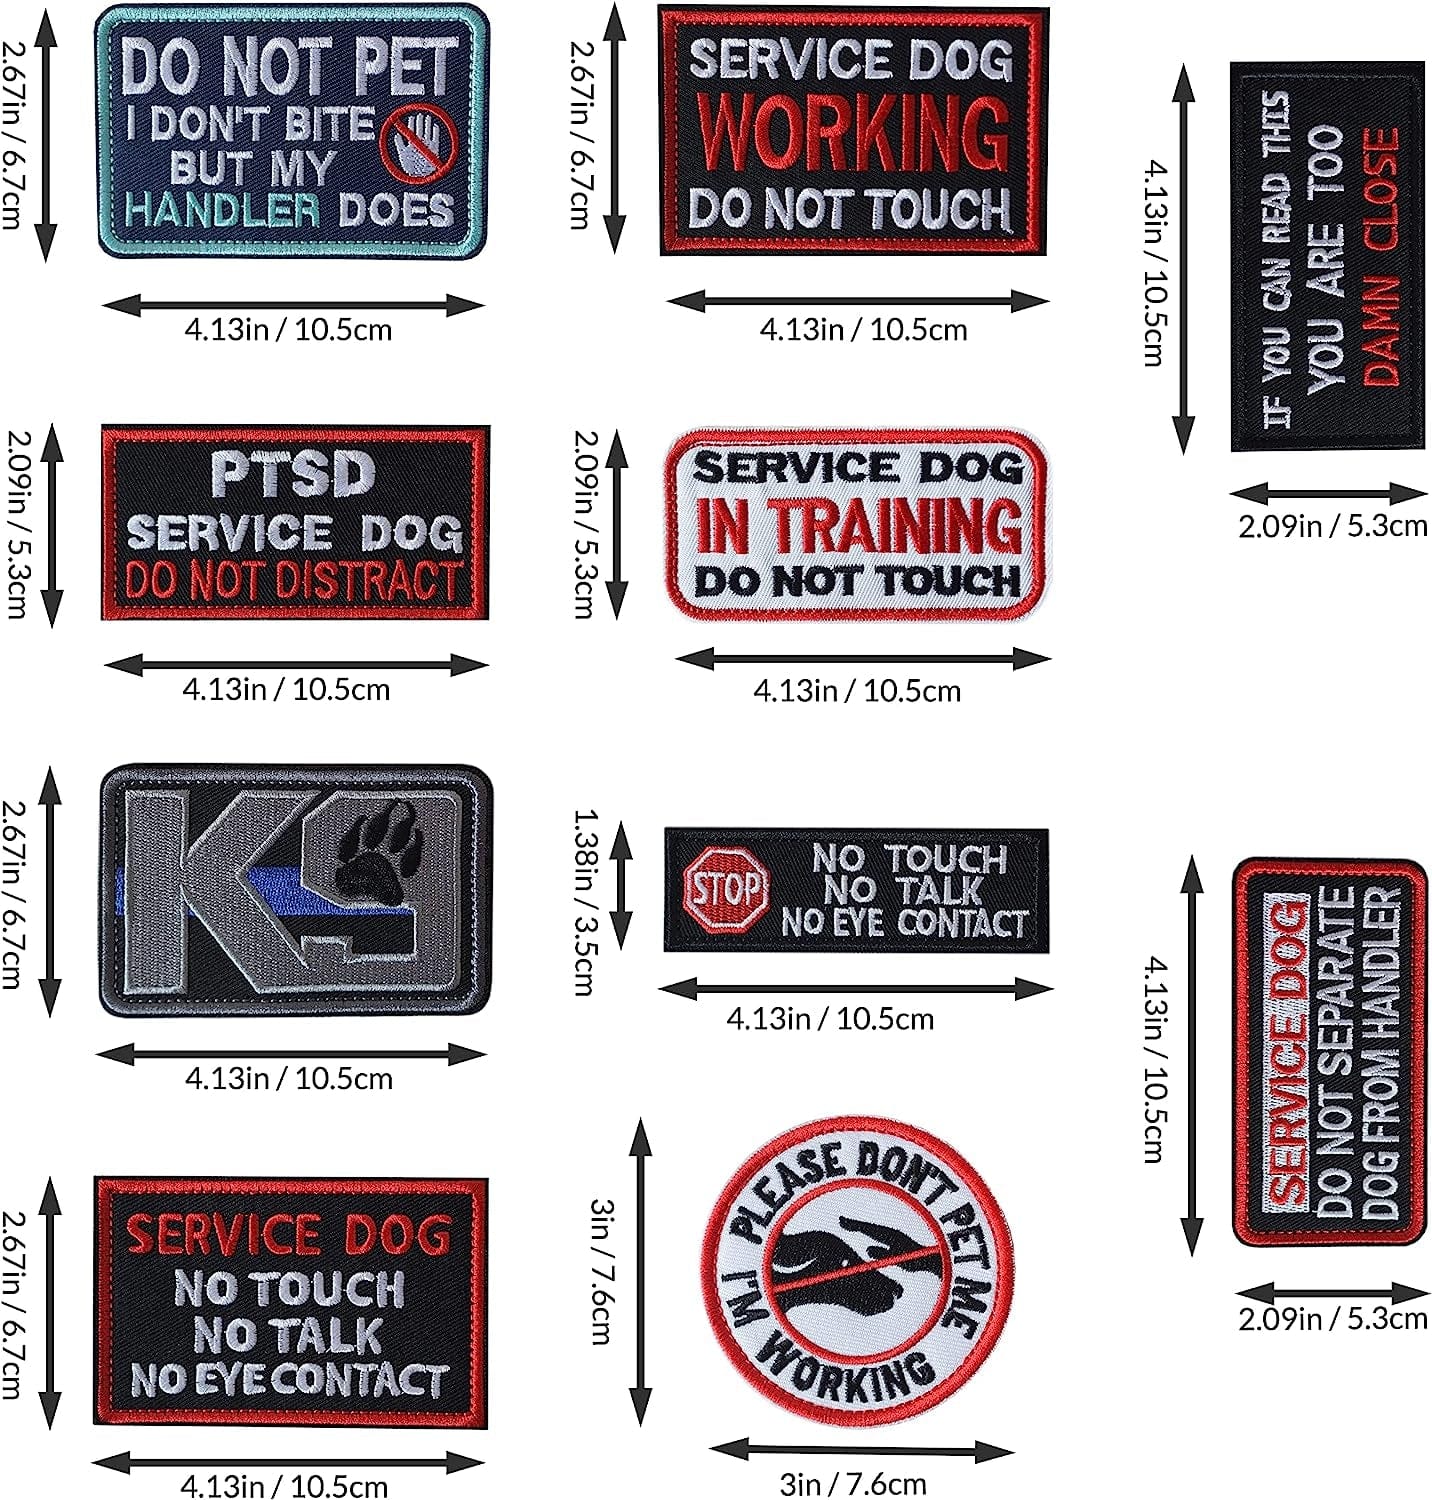 16 Pieces Service Dog Patch Do Not Pet Patch Ask to Pet Patch